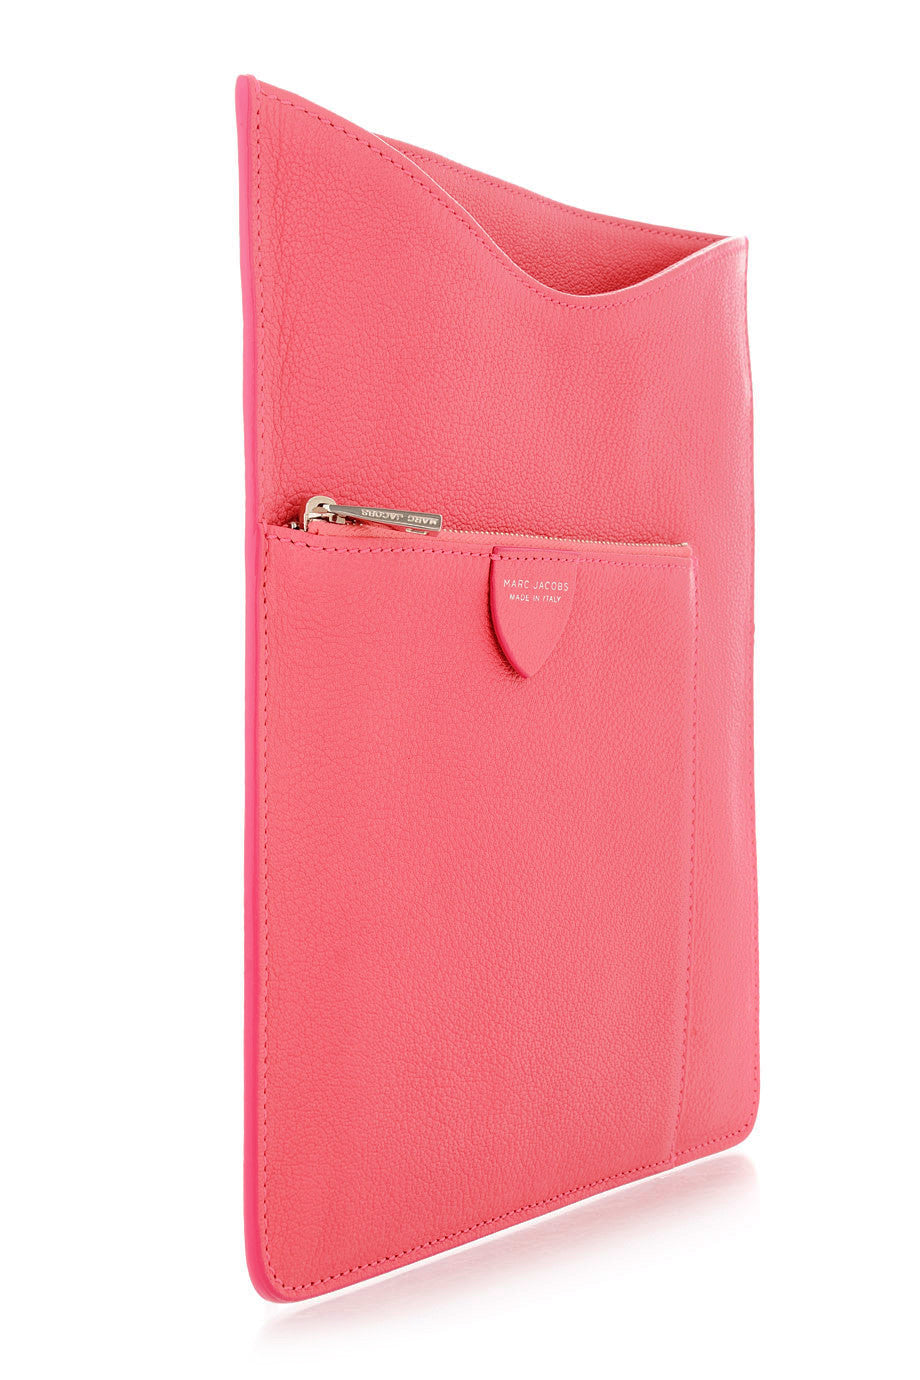 MARC JACOBS Ipad Case with Multiple Pockets